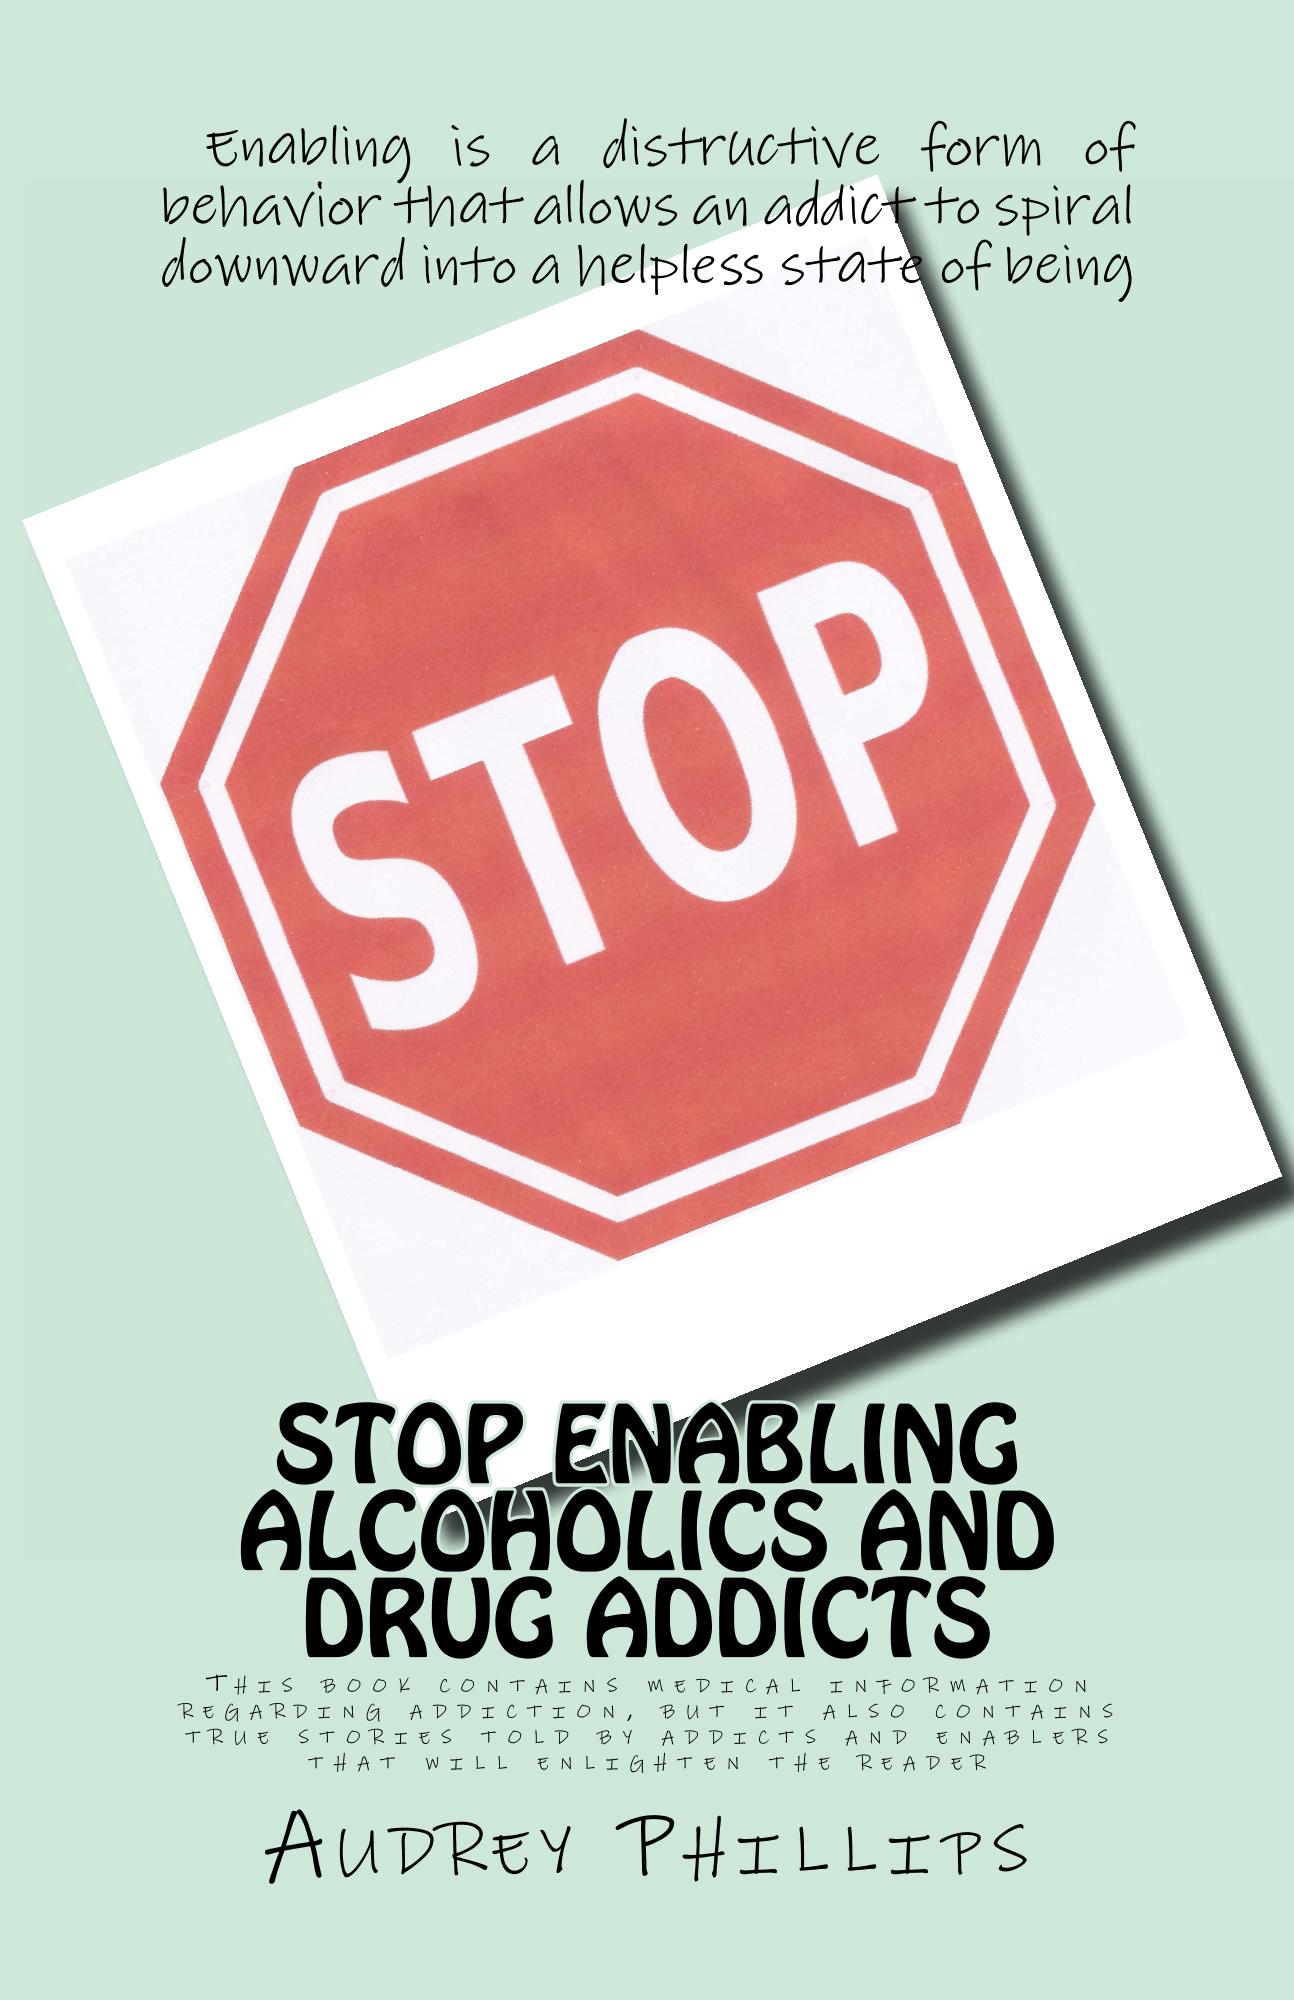 Stop Enabling Alcoholic and Drug Addicts: Helping an addict can be harmful if it allows them to continue spiraling downward in their addiction. (Volume 1)